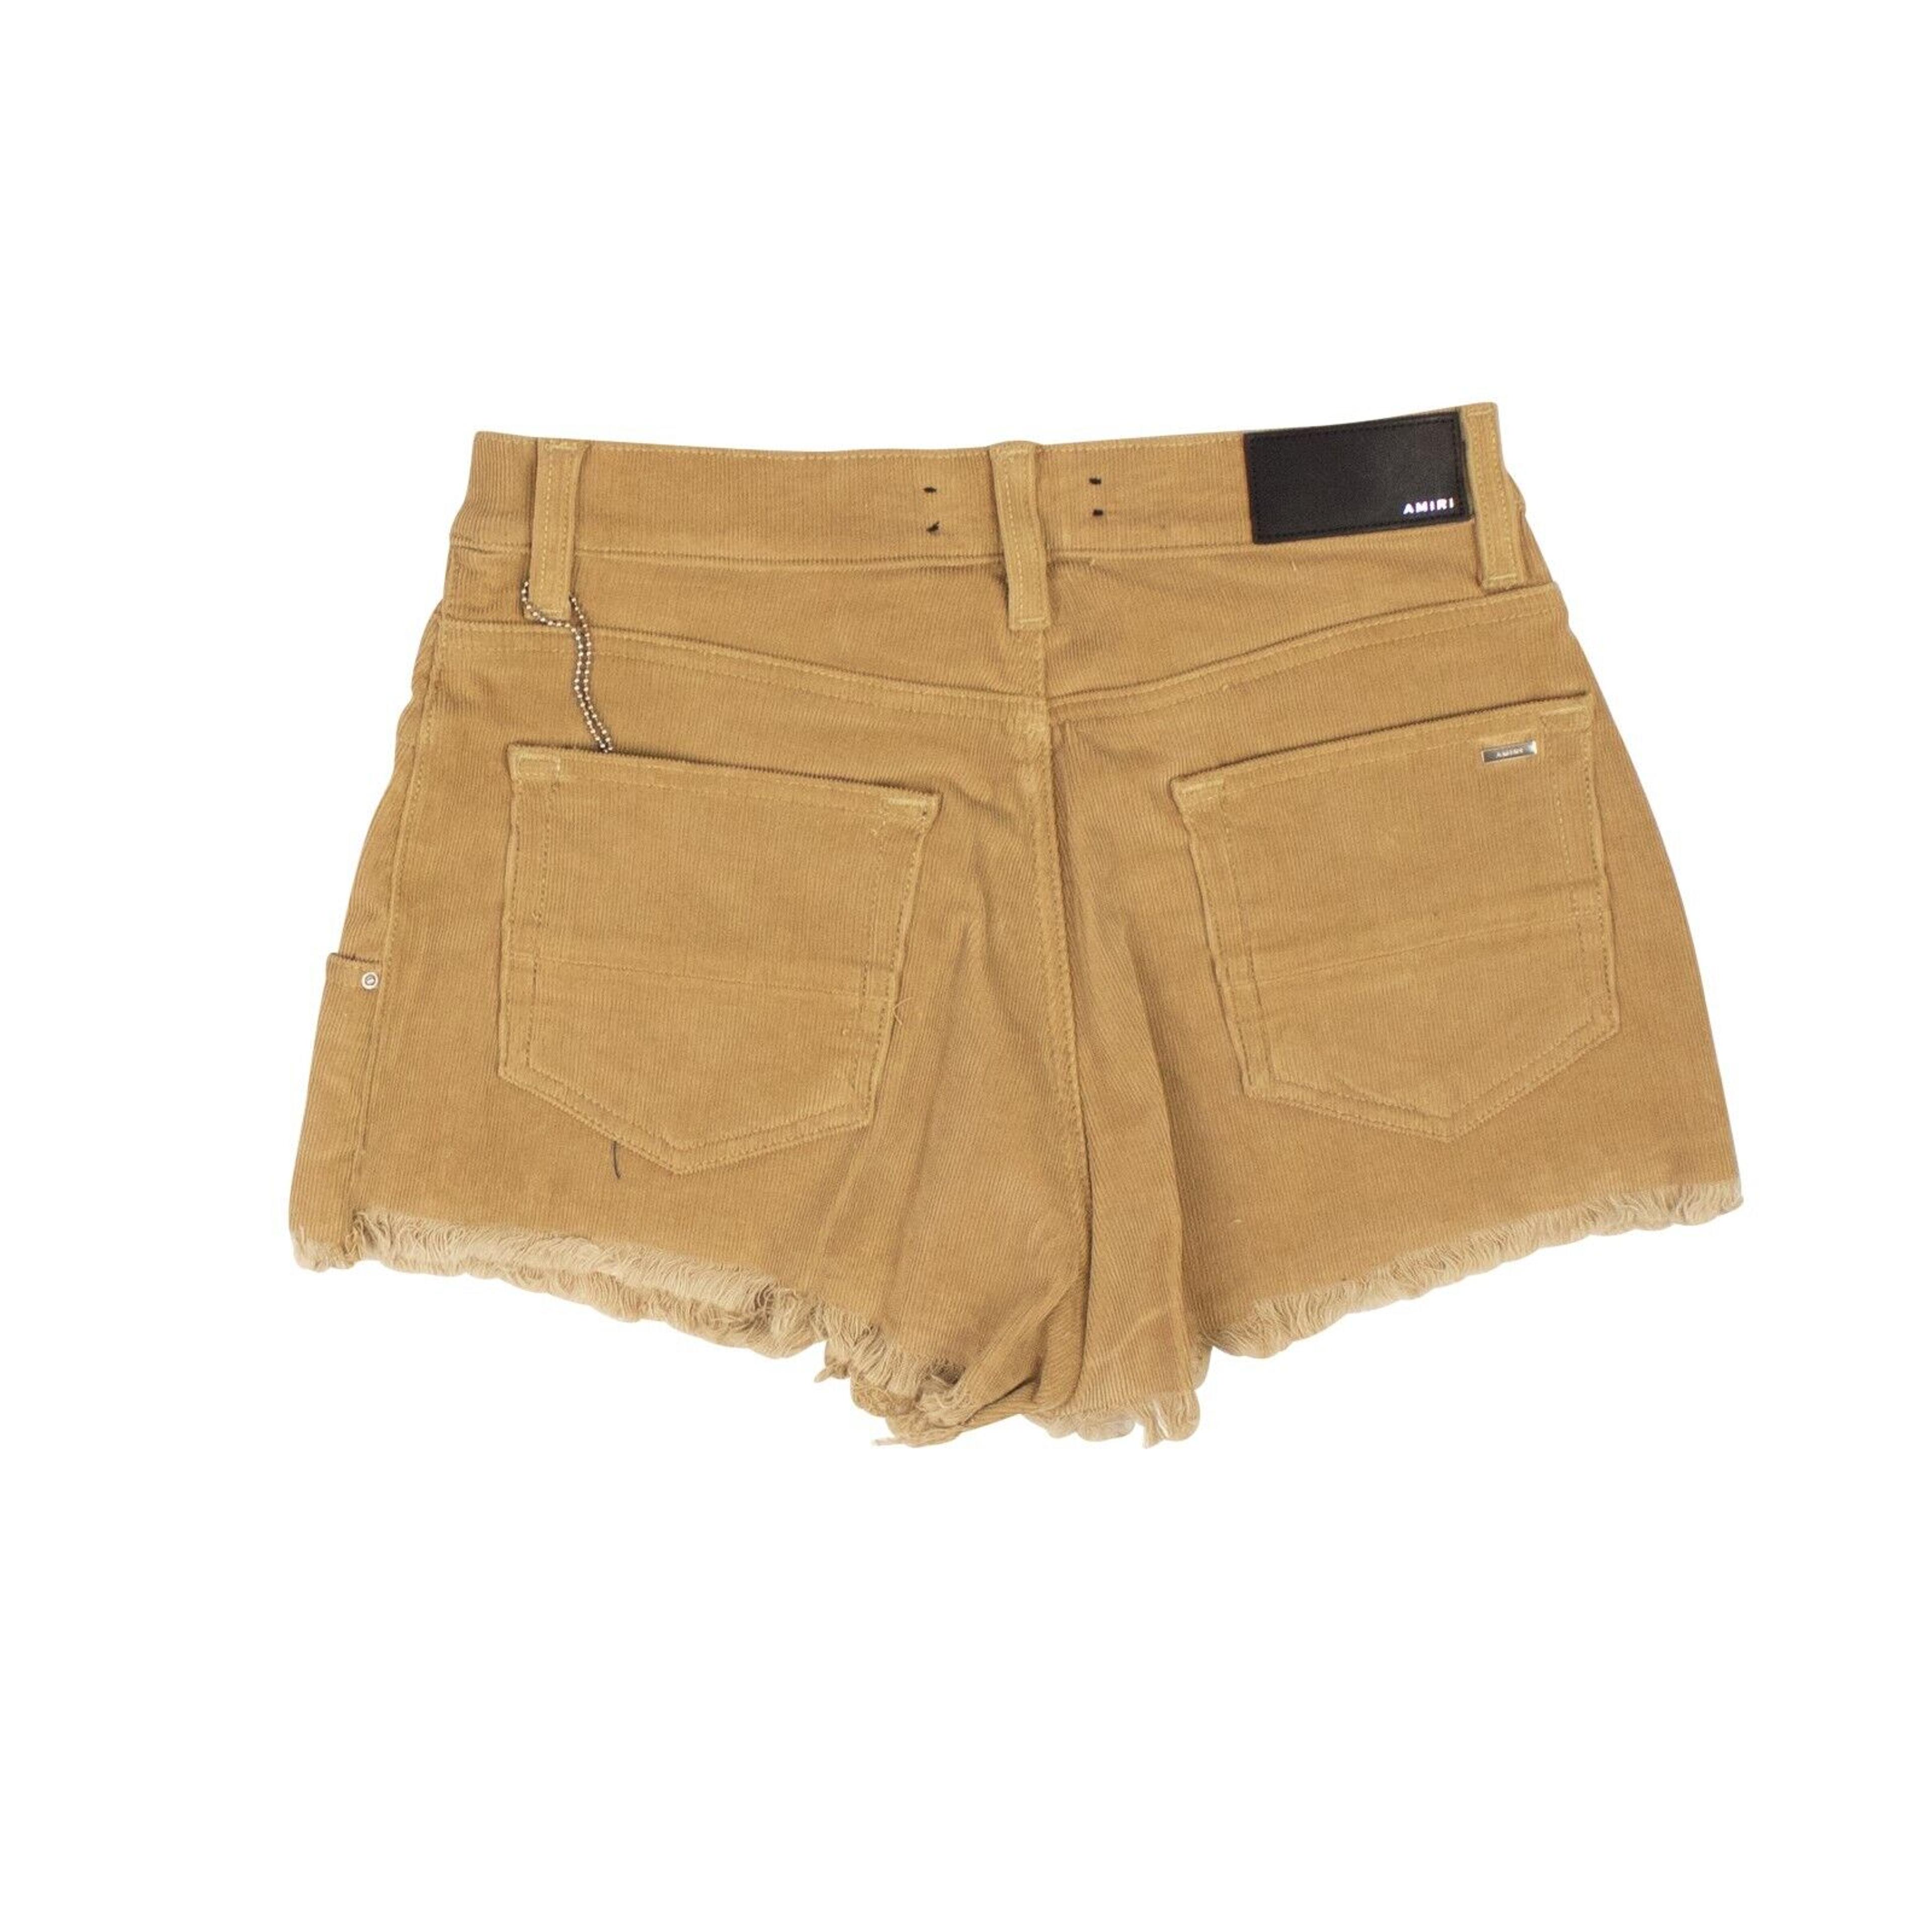 Alternate View 2 of Brown Corduroy High Waisted Shorts